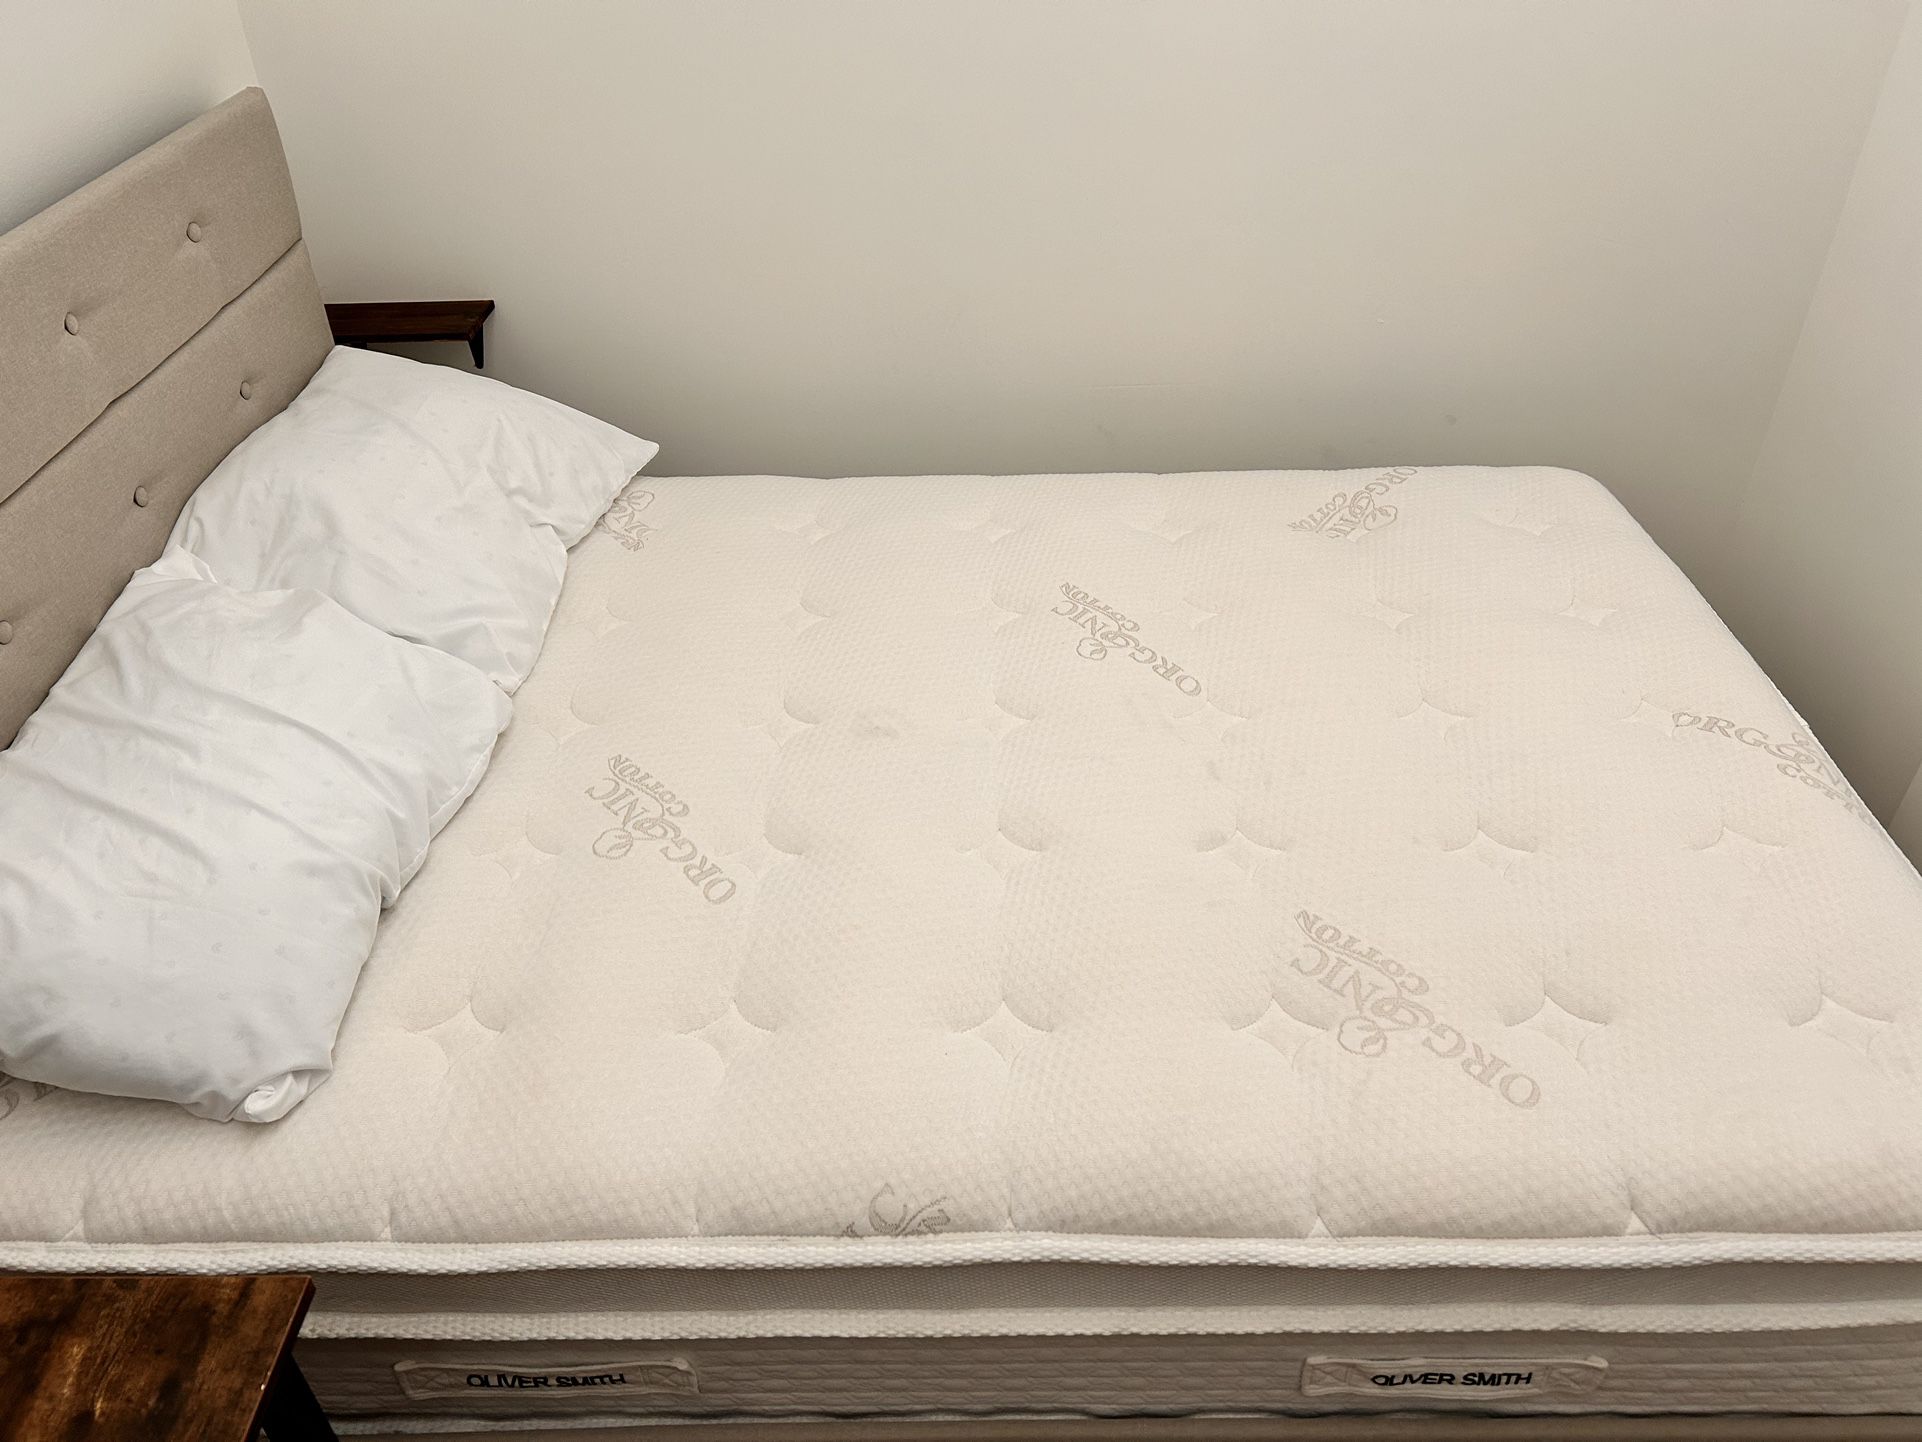 Double Bed Frame And Mattress 